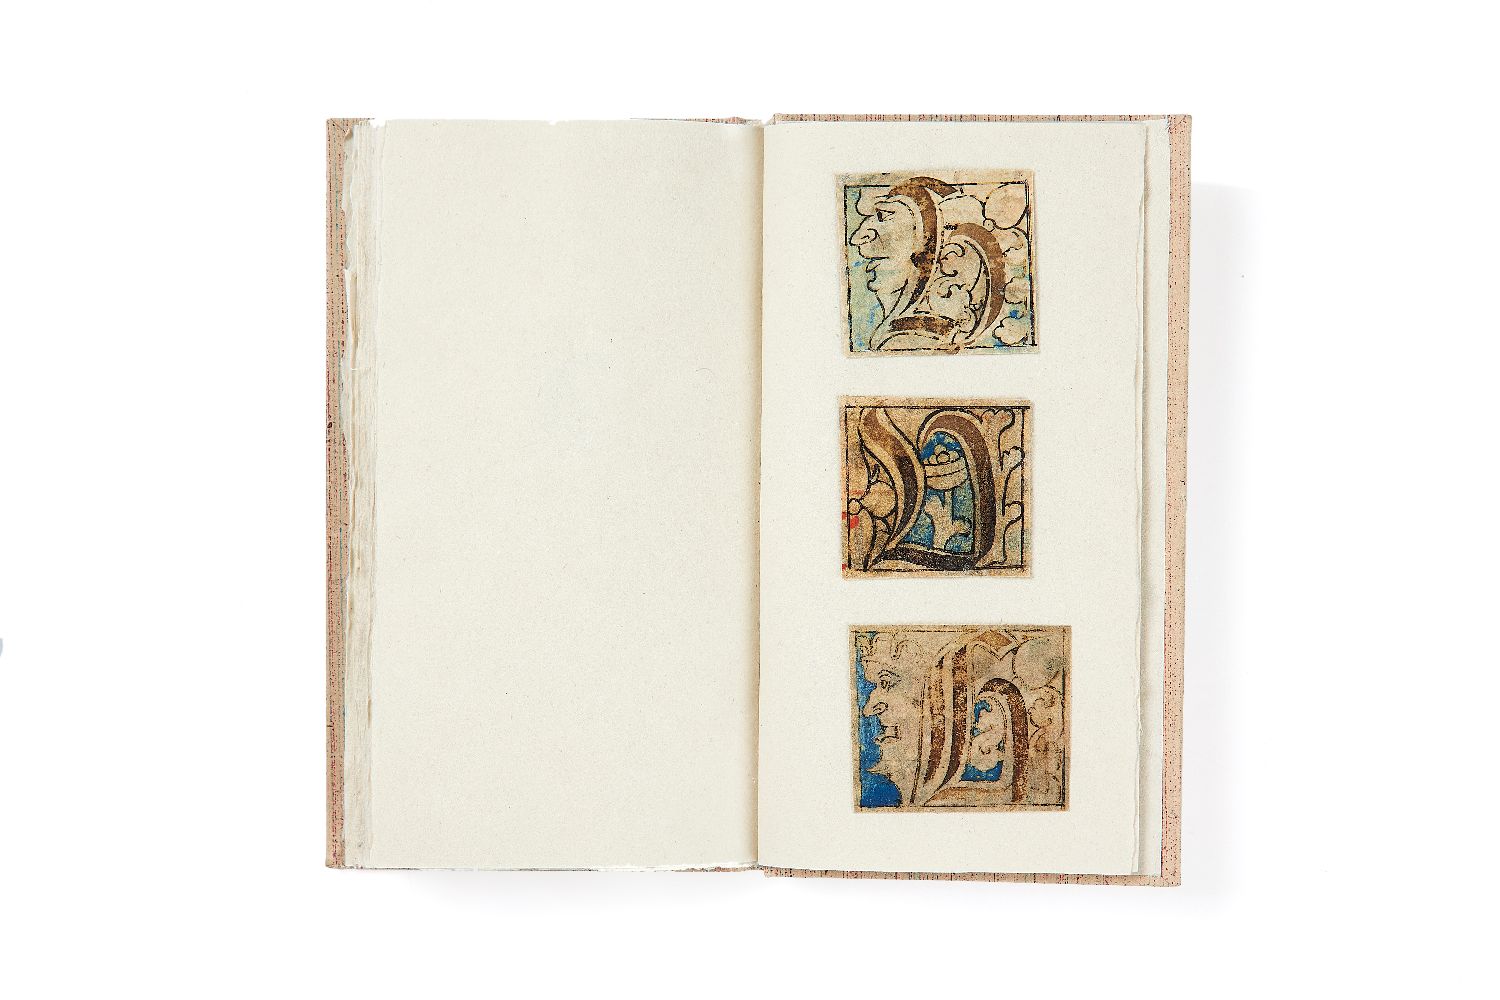 Ɵ Collection of small miniatures from Books of Hours, and initials from another codex - Image 4 of 4